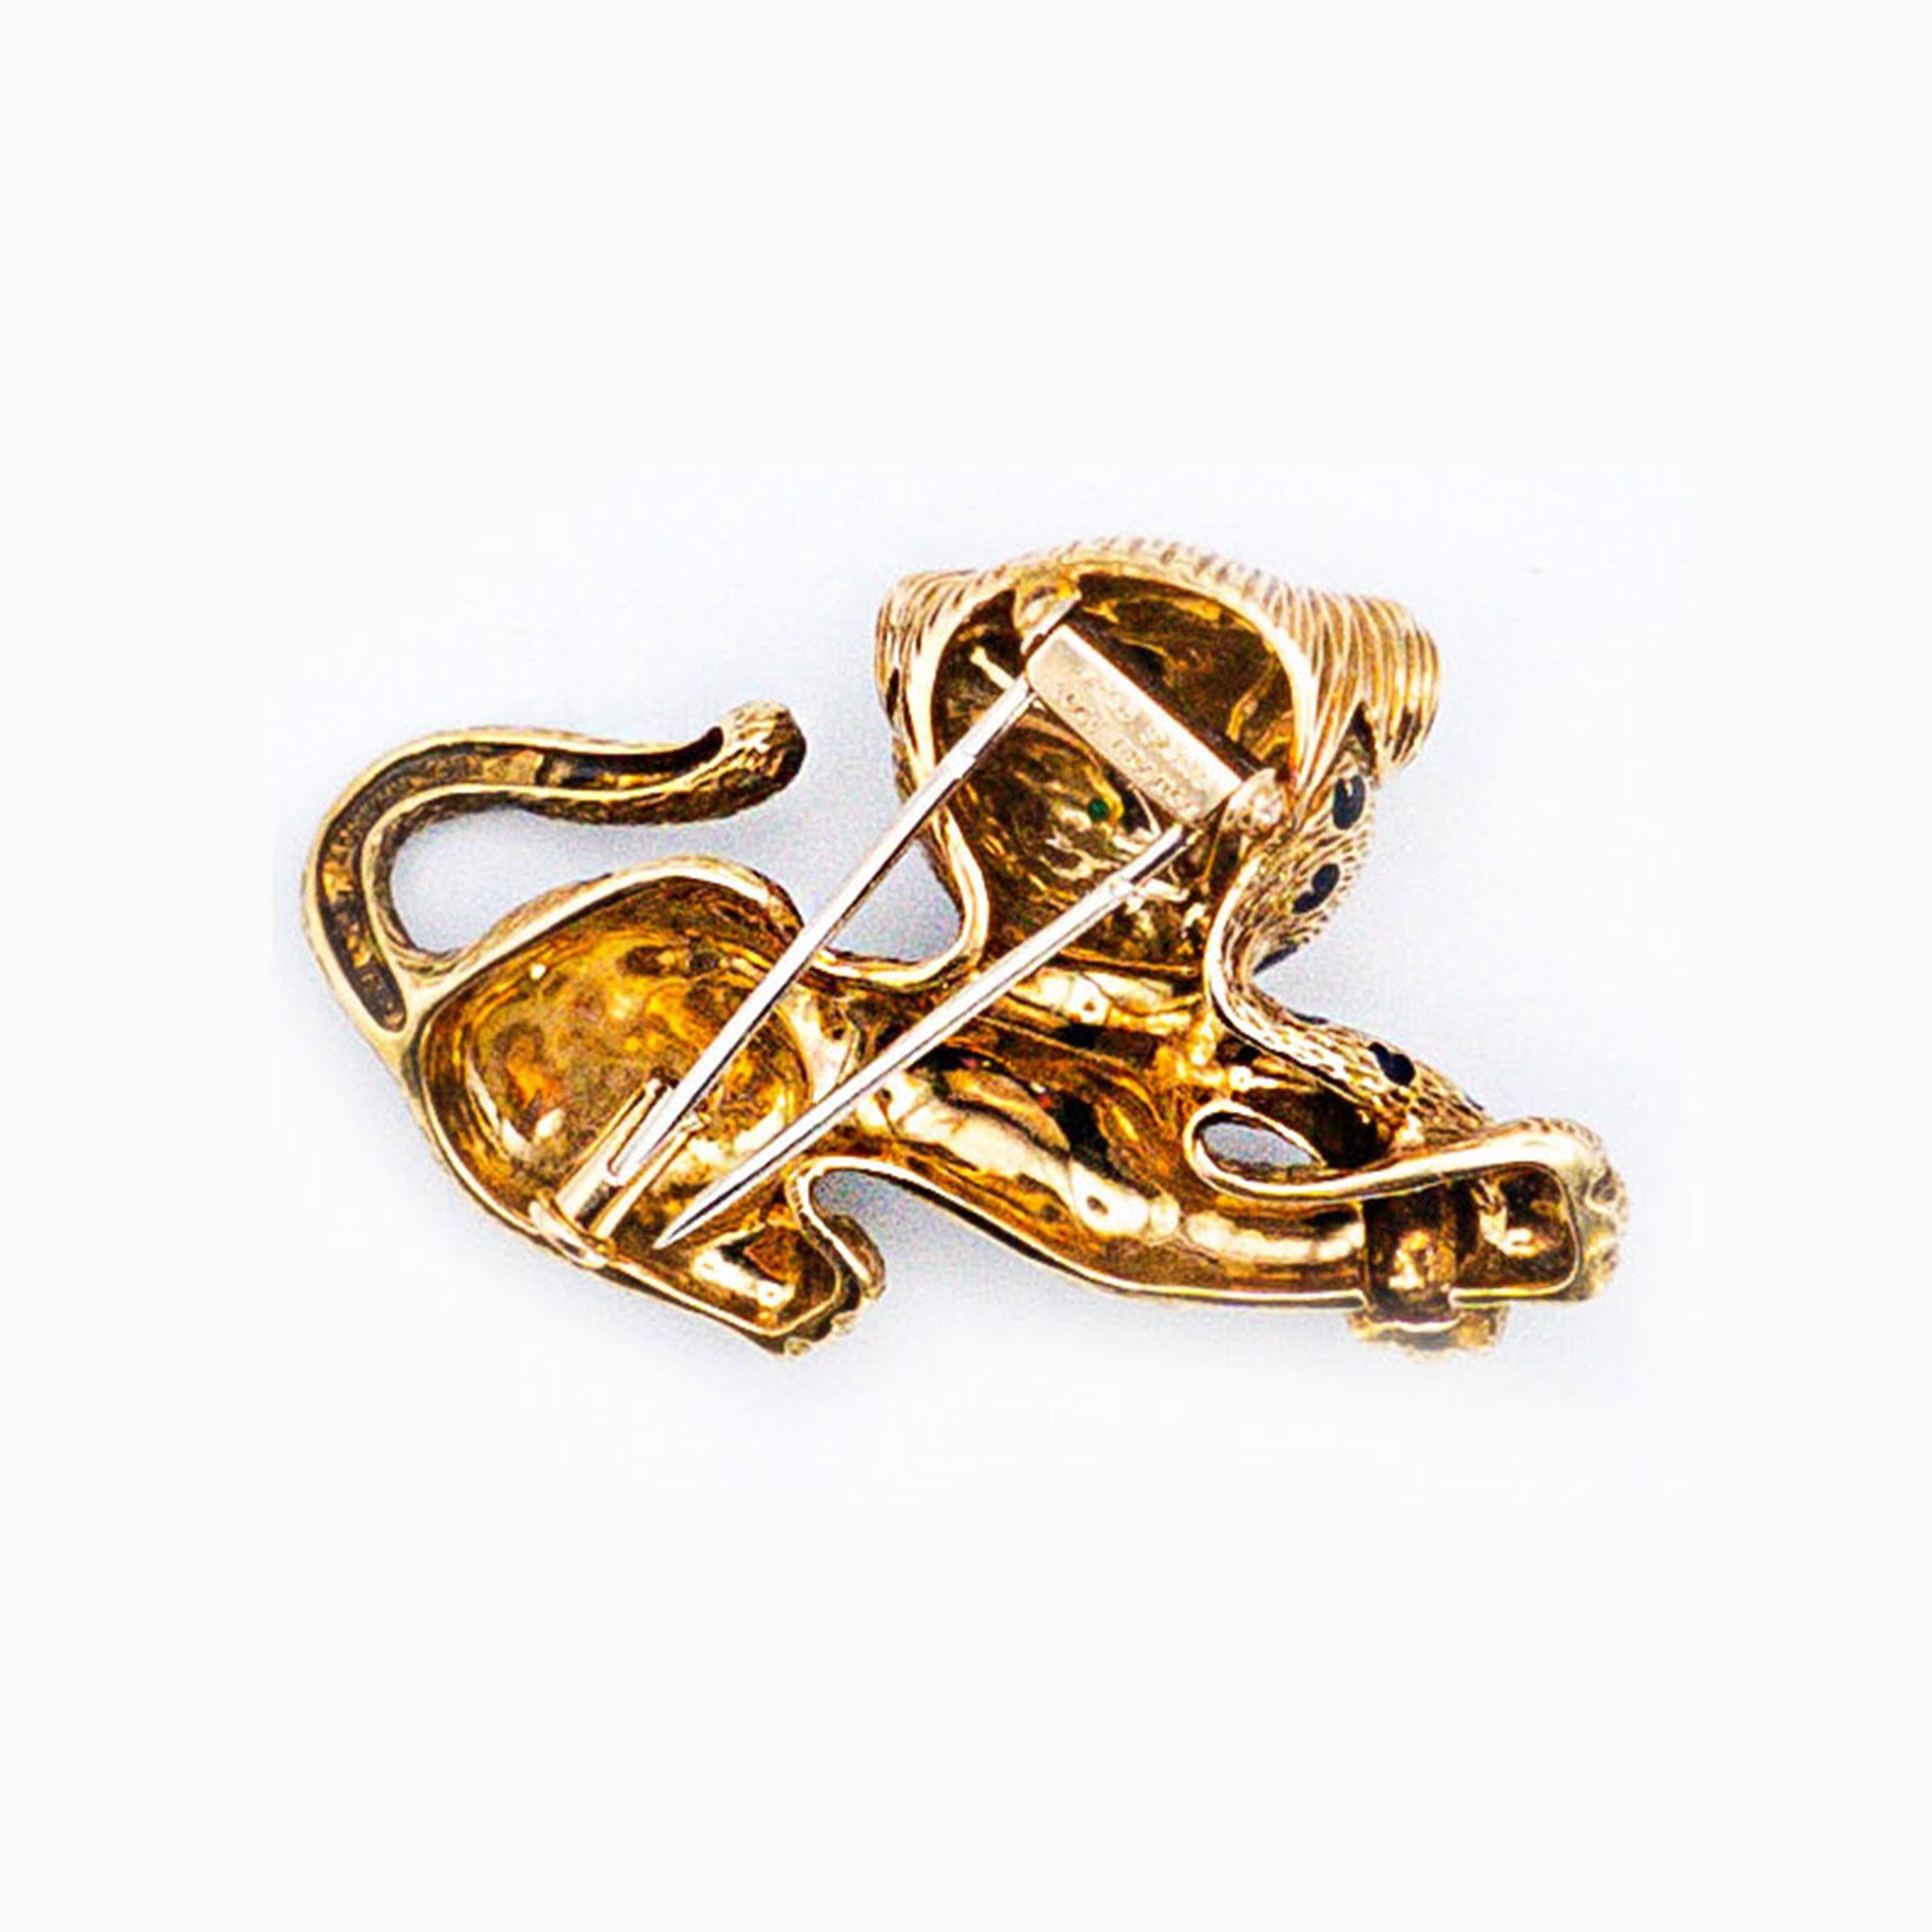 Cabochon Panther Brooch by FRED Paris For Sale